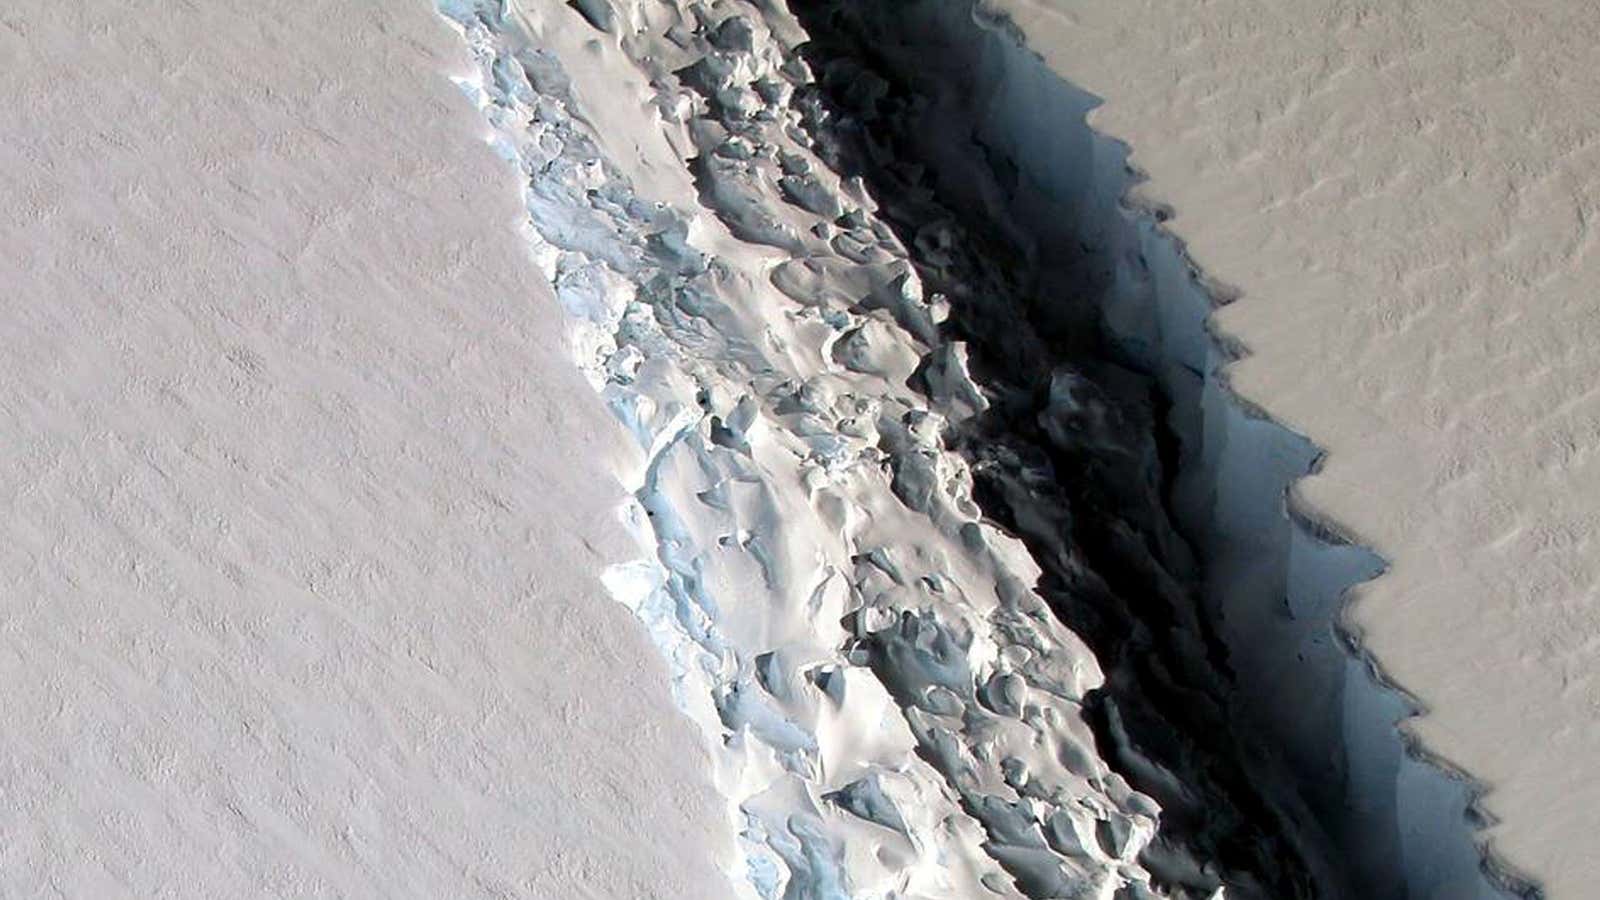 A growing rift. The Larson C ice shelf photographed in Nov. 2016.